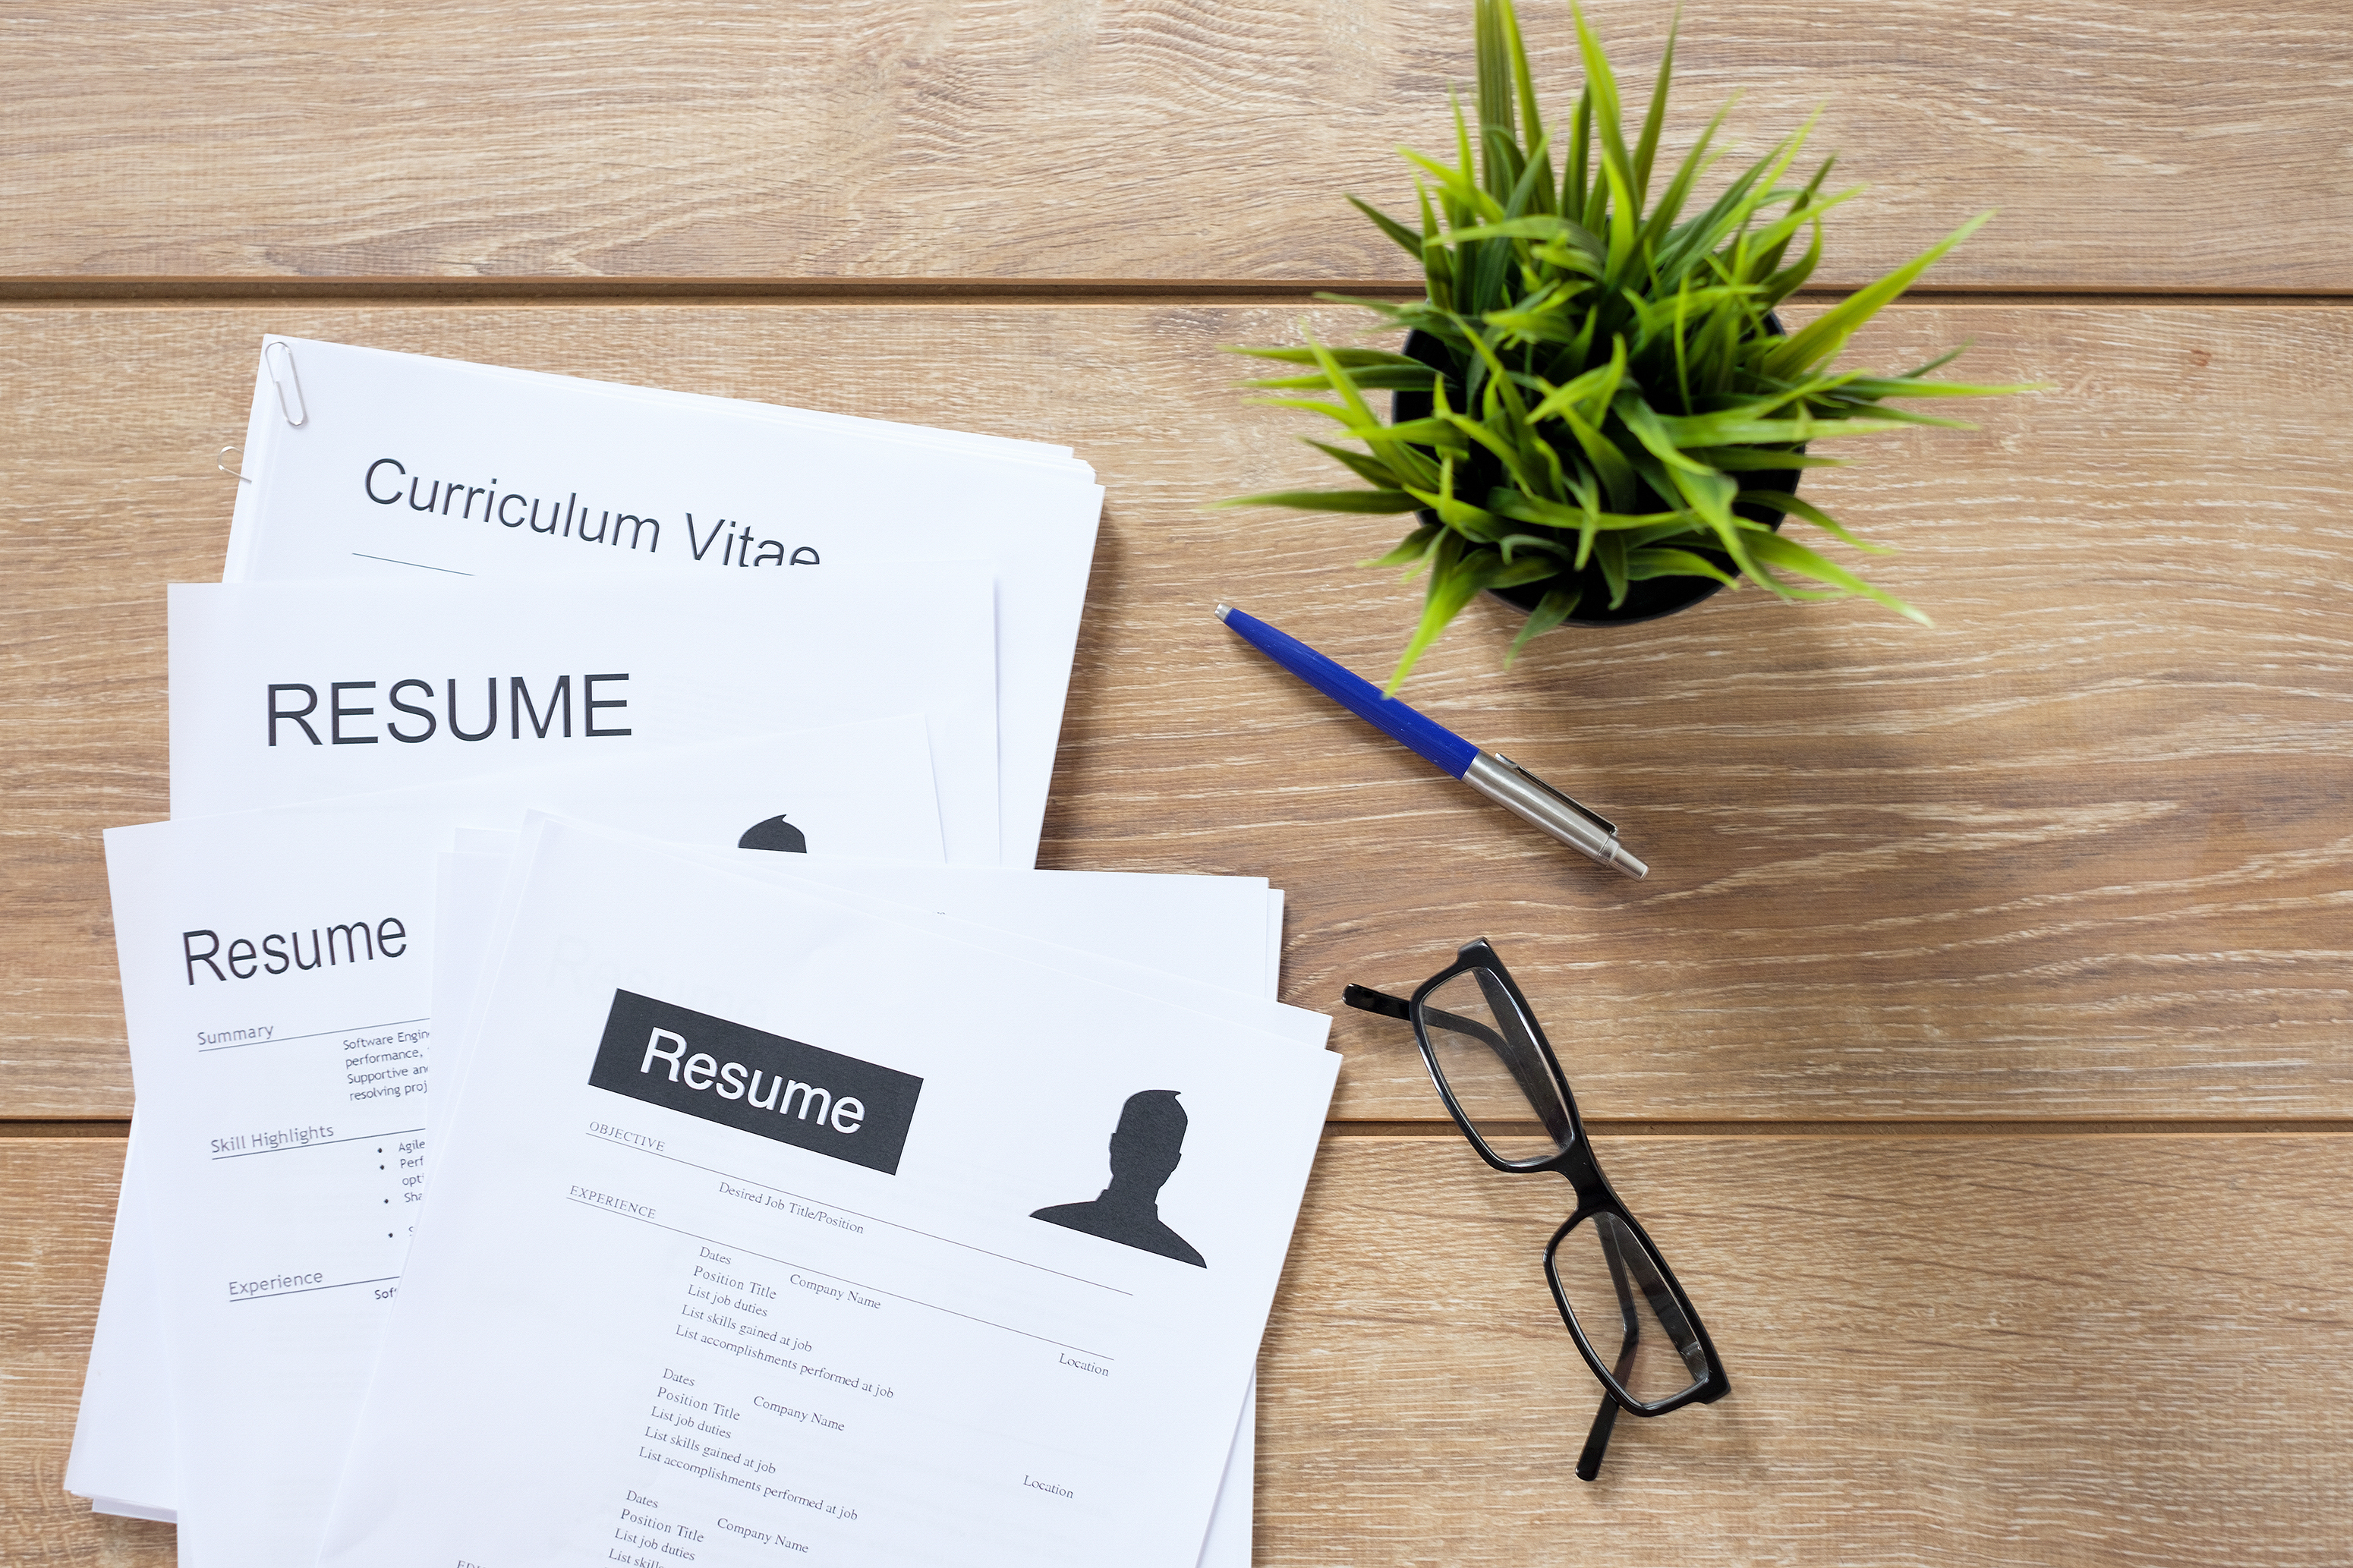 Resume Writing Skills for IT employees